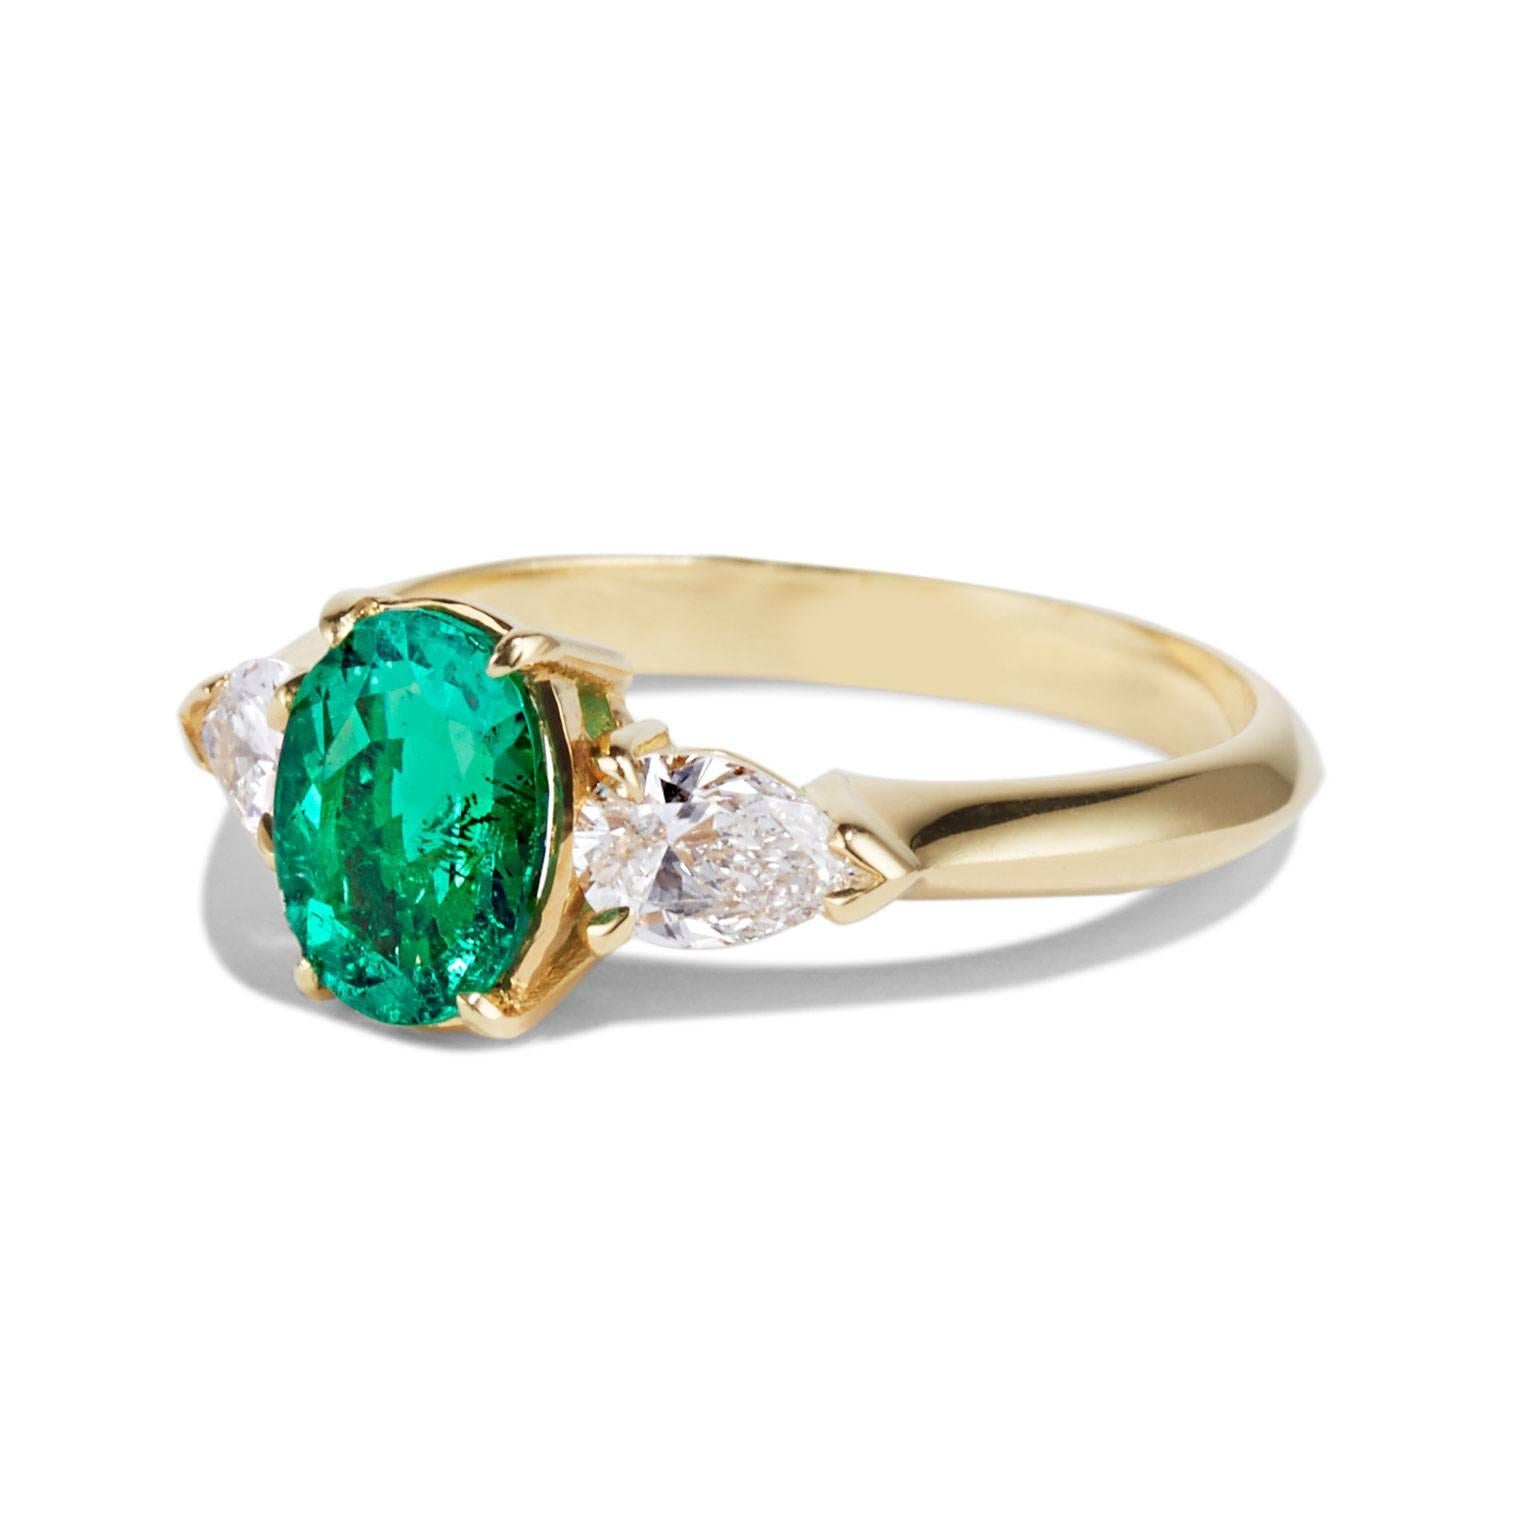 This extraordinarily vibrant Muzo Emerald has been ethically sourced directly from the Muzo mine in Colombia. It is flanked by two pear shaped white diamonds that enhance the natural brightness of the emerald. Set in 18 carat yellow gold, this